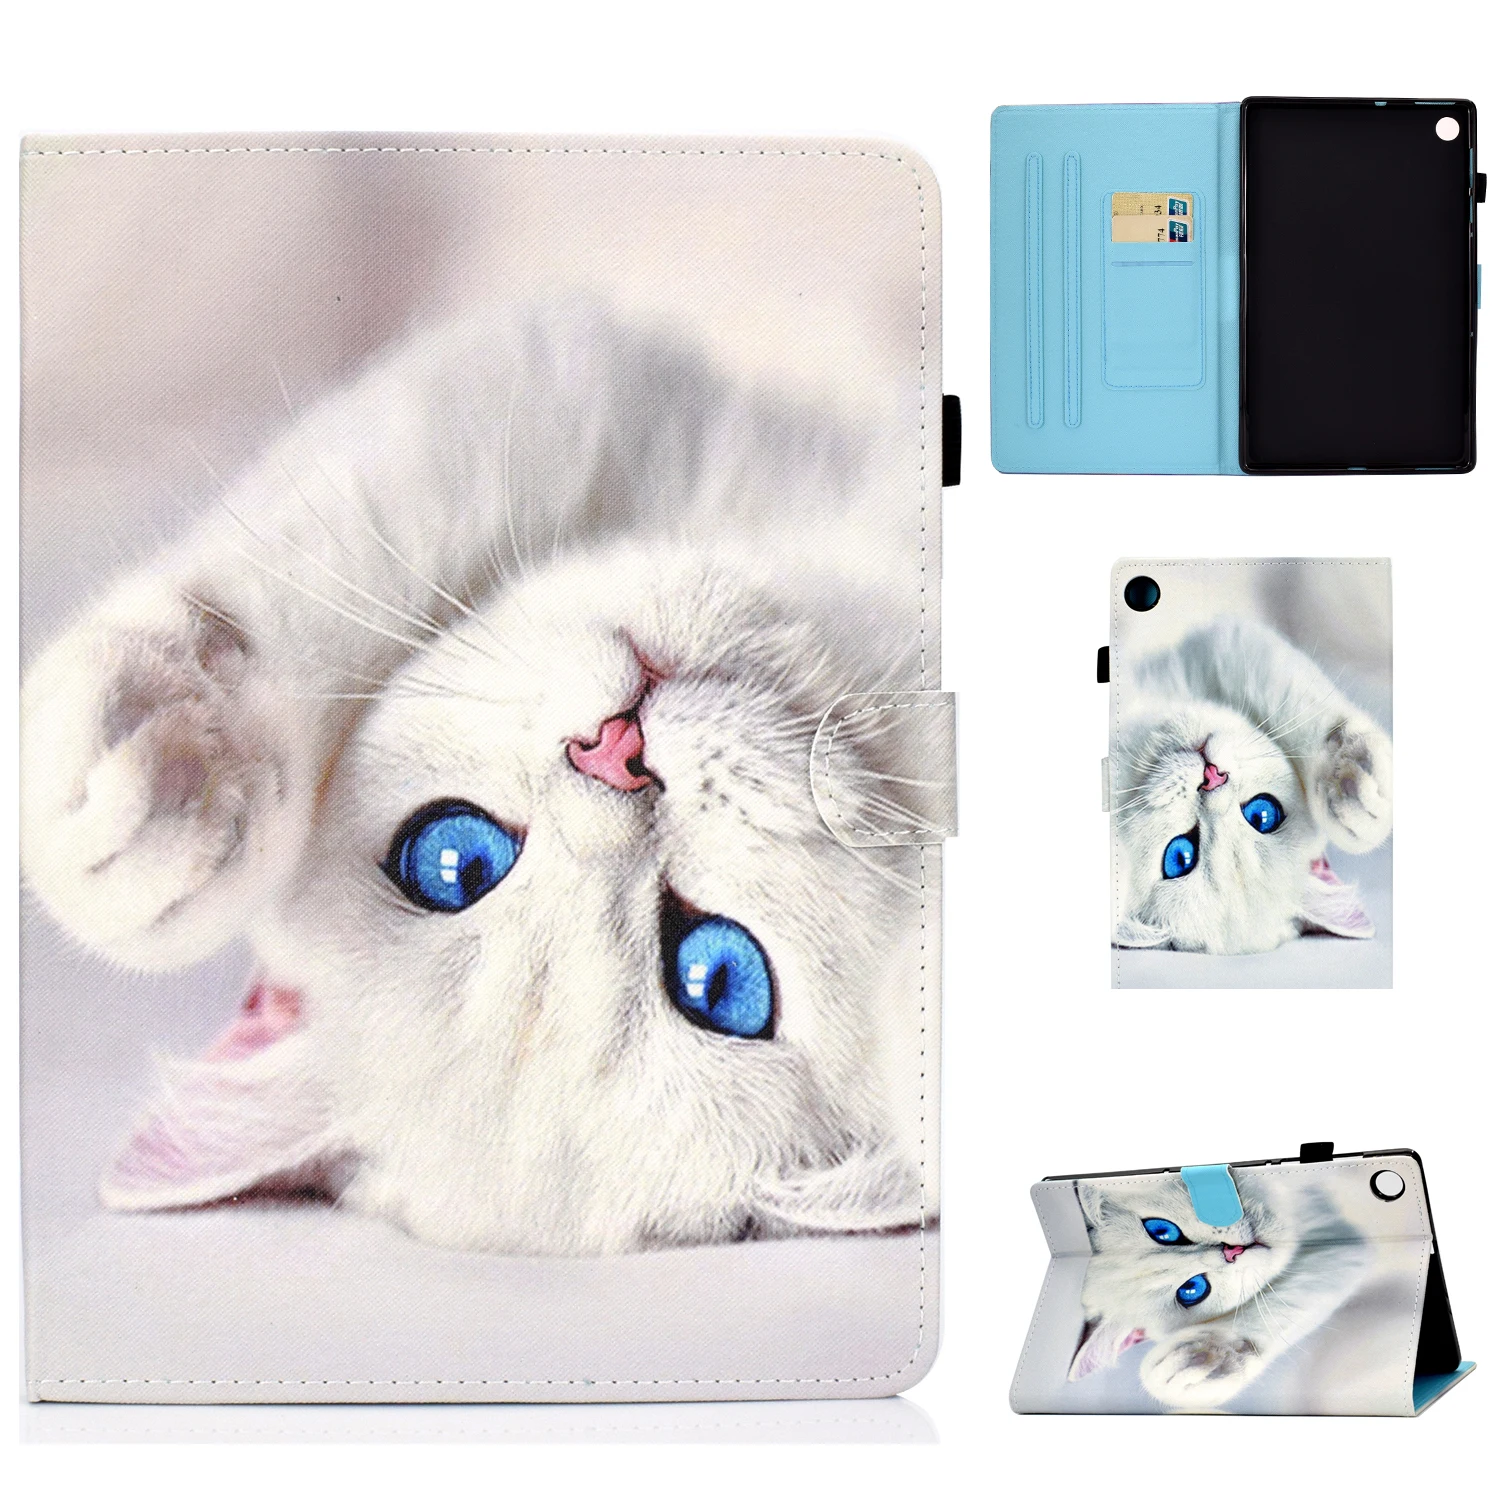 

Cartootn PU Leather Tablet Case for Huawei MatePad SE 10.4 inch AGS5-L09 AGS5-W09 with Flip Stand Casing Cover White Cat